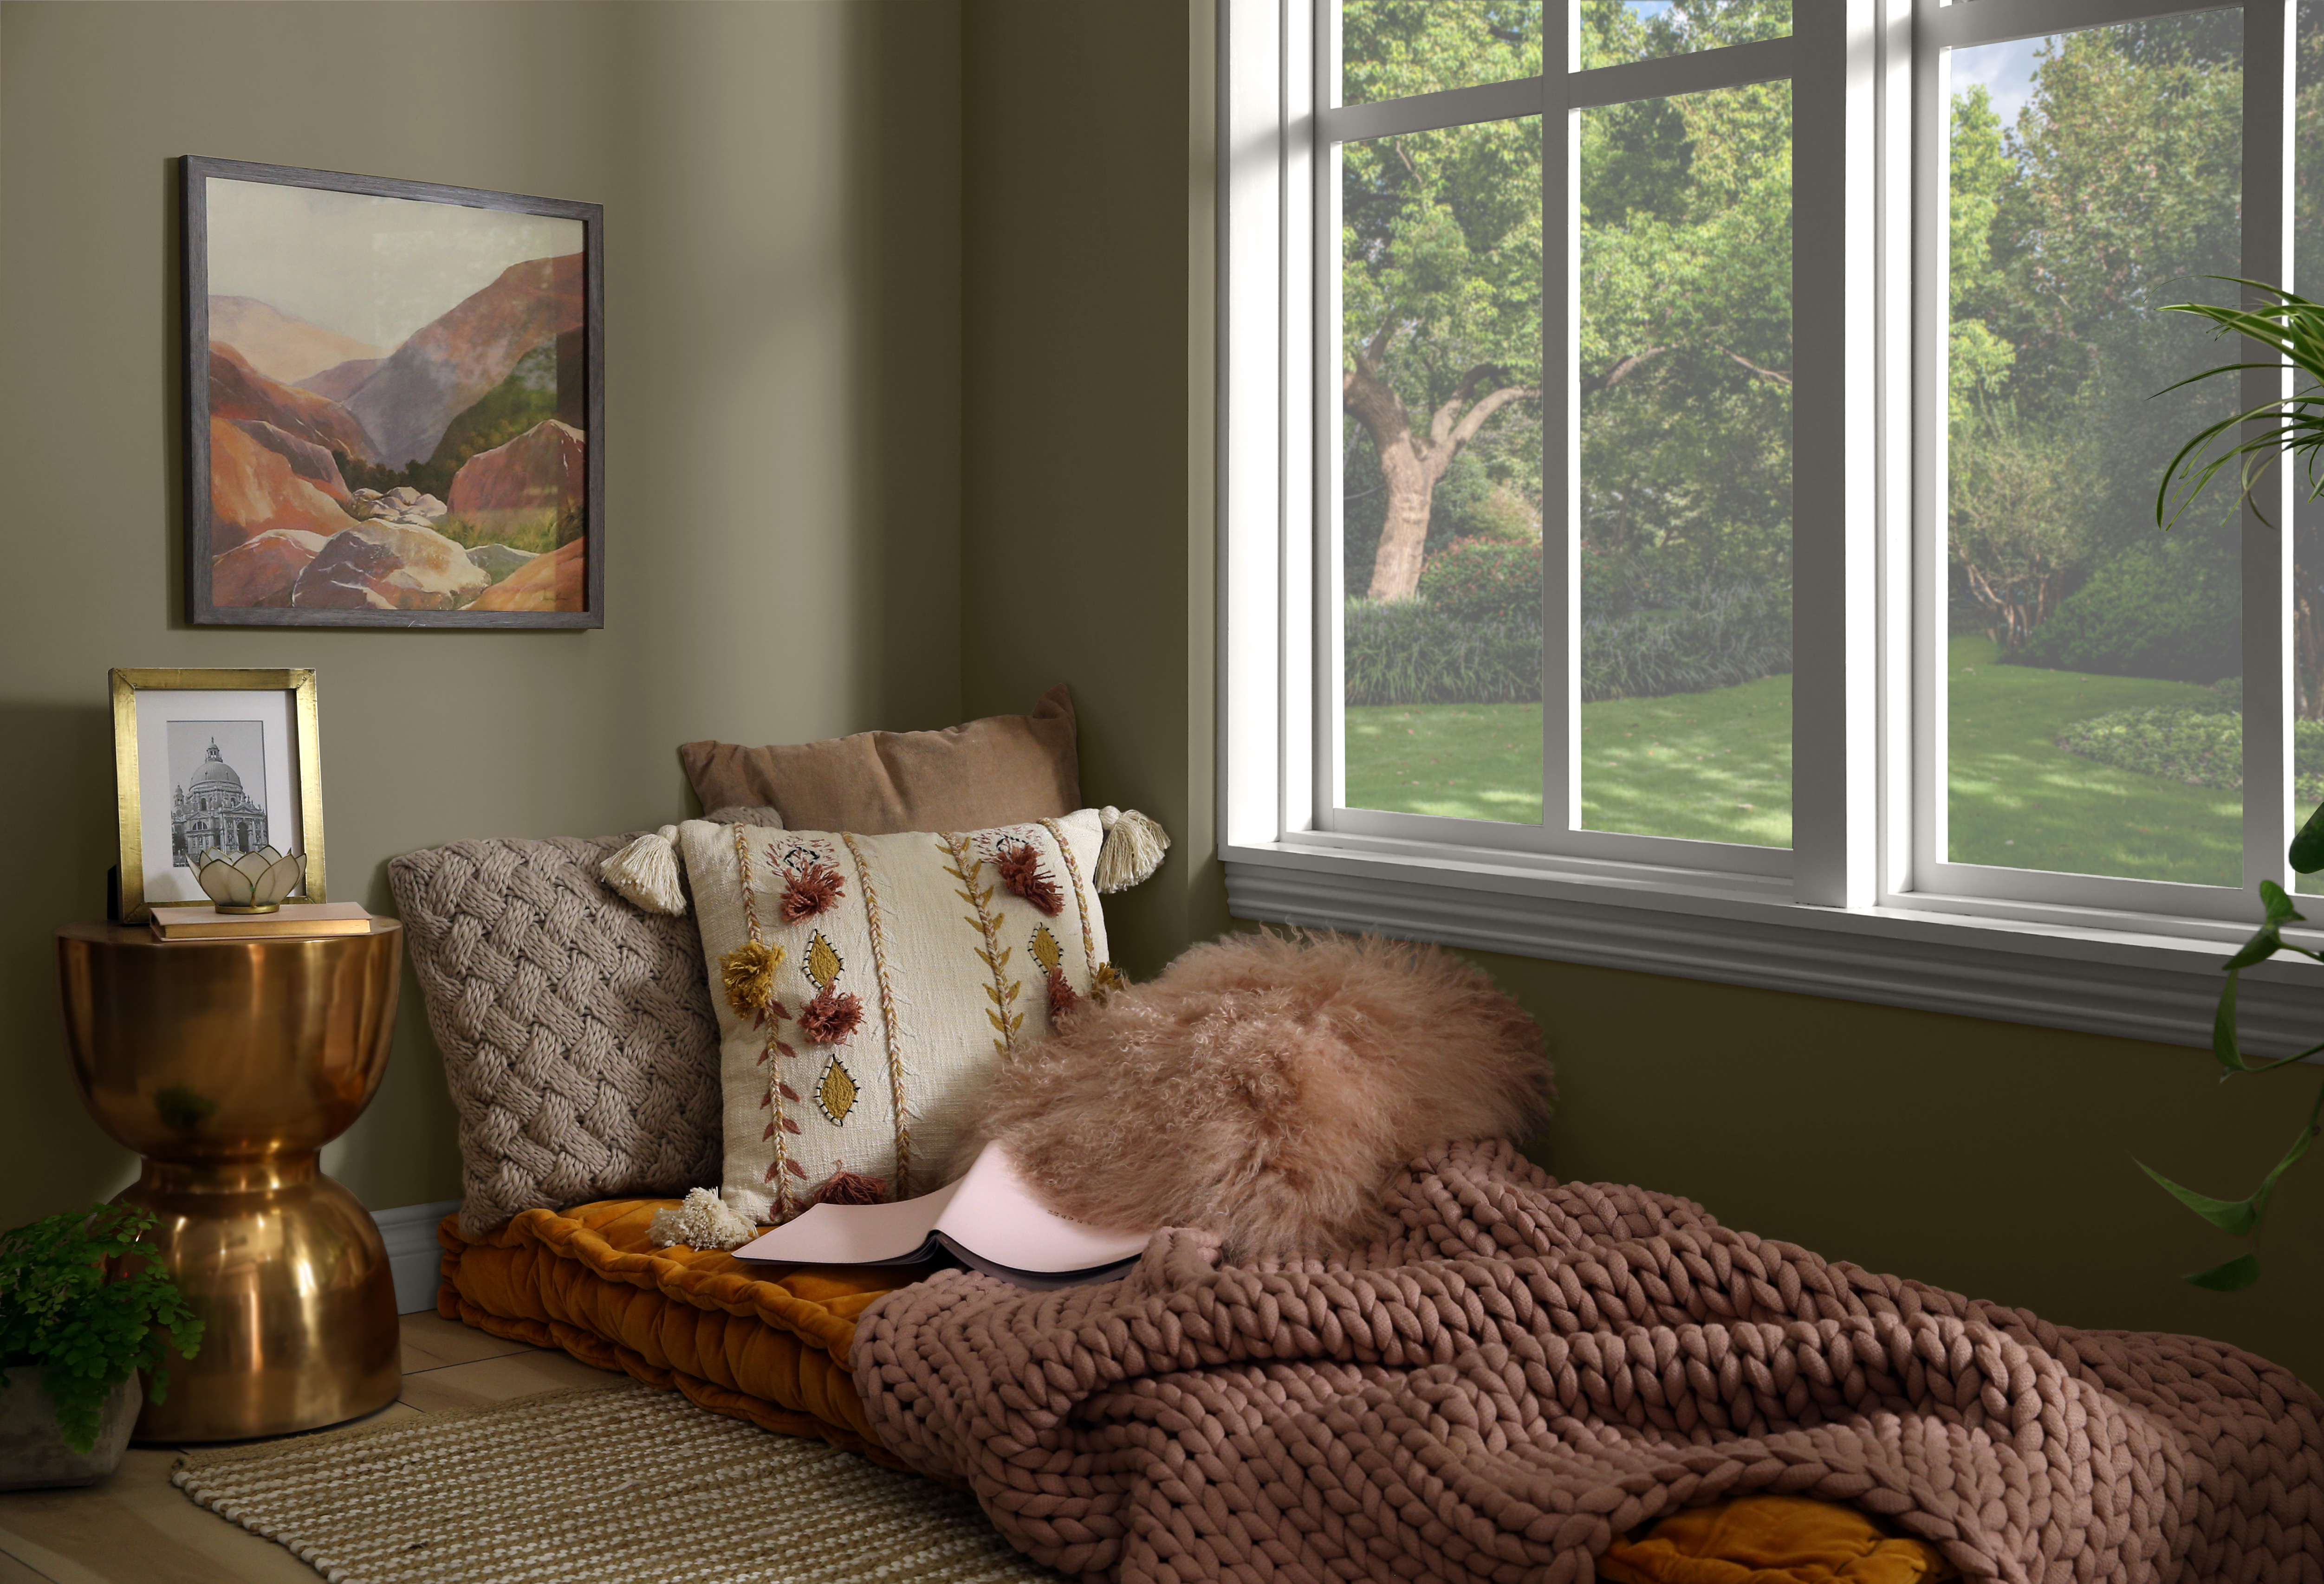 A cozy reading and lounging corner next to a large window and styled with pillows and blankets, with the walls painted in a dark olive-brown colour